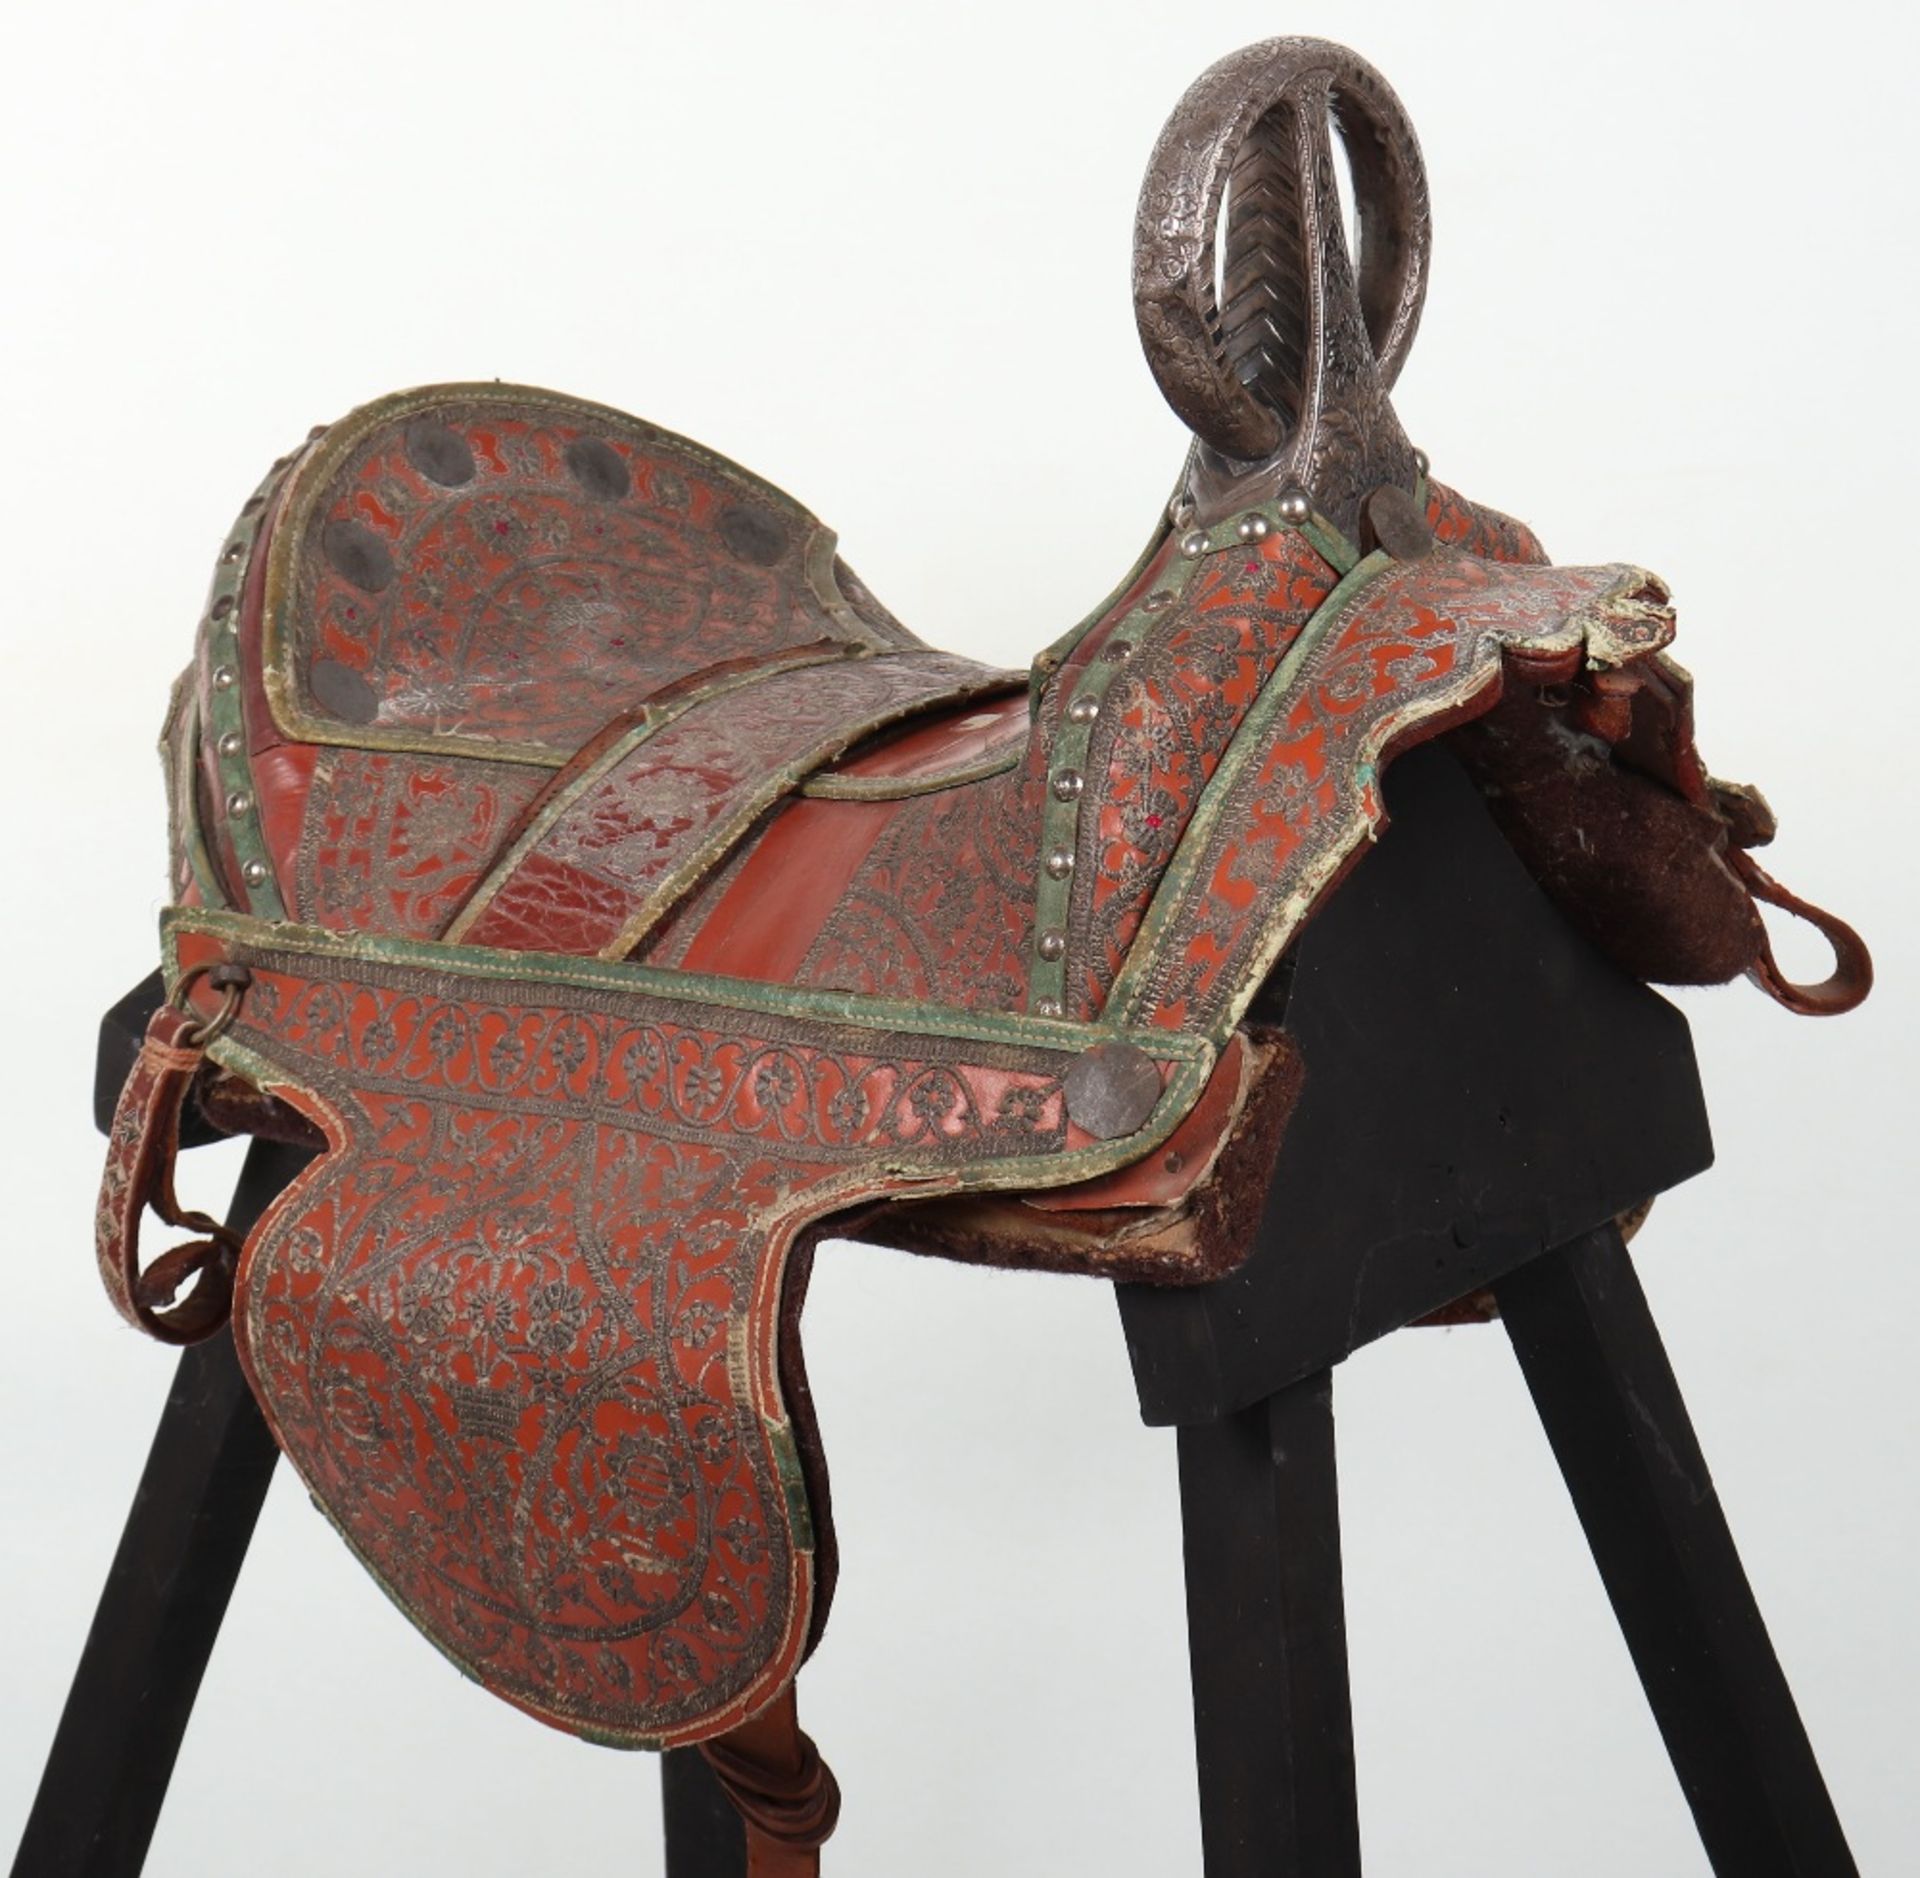 Fine and Scarce North Indian Saddle, Probably Late 19th or Early 20th Century - Image 7 of 12